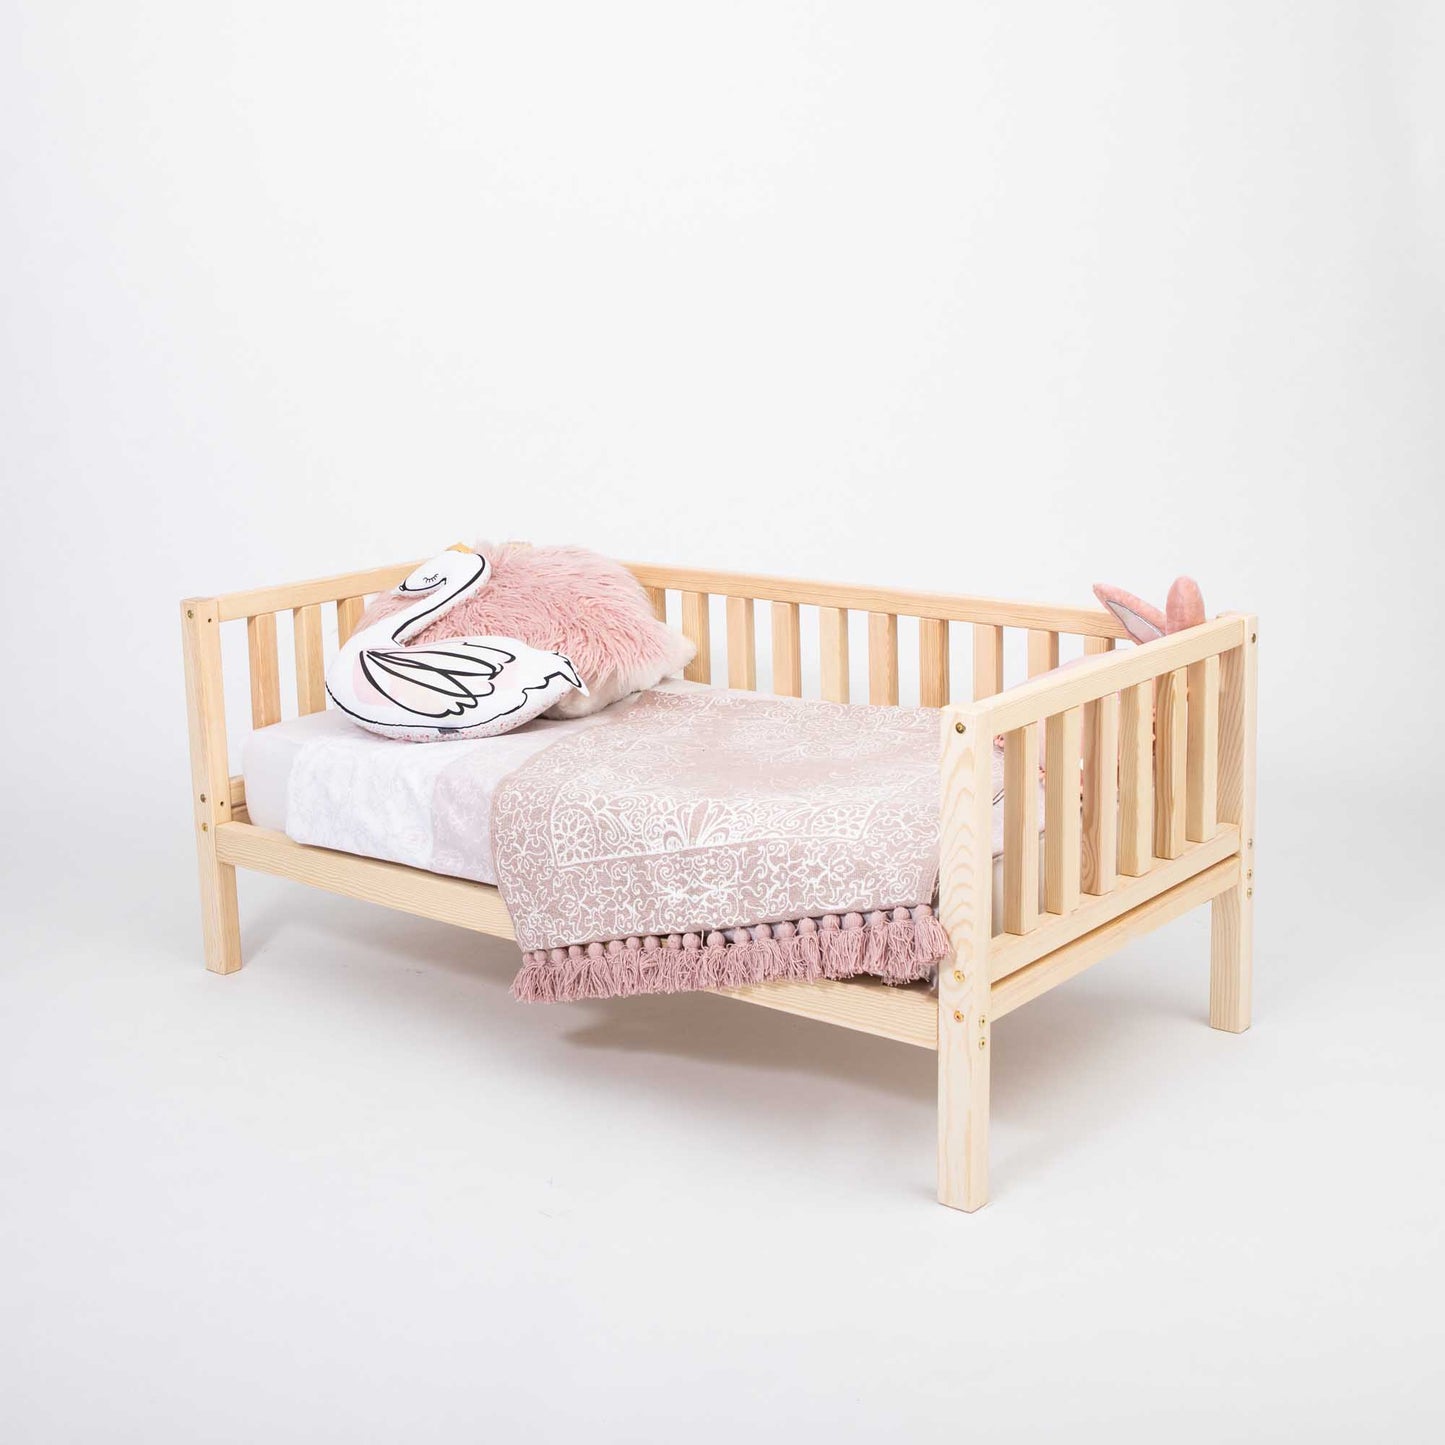 A Sweet Home From Wood 2-in-1 toddler bed on legs with a 3-sided vertical rail made of solid pine or birch wood, adorned with a pink blanket.